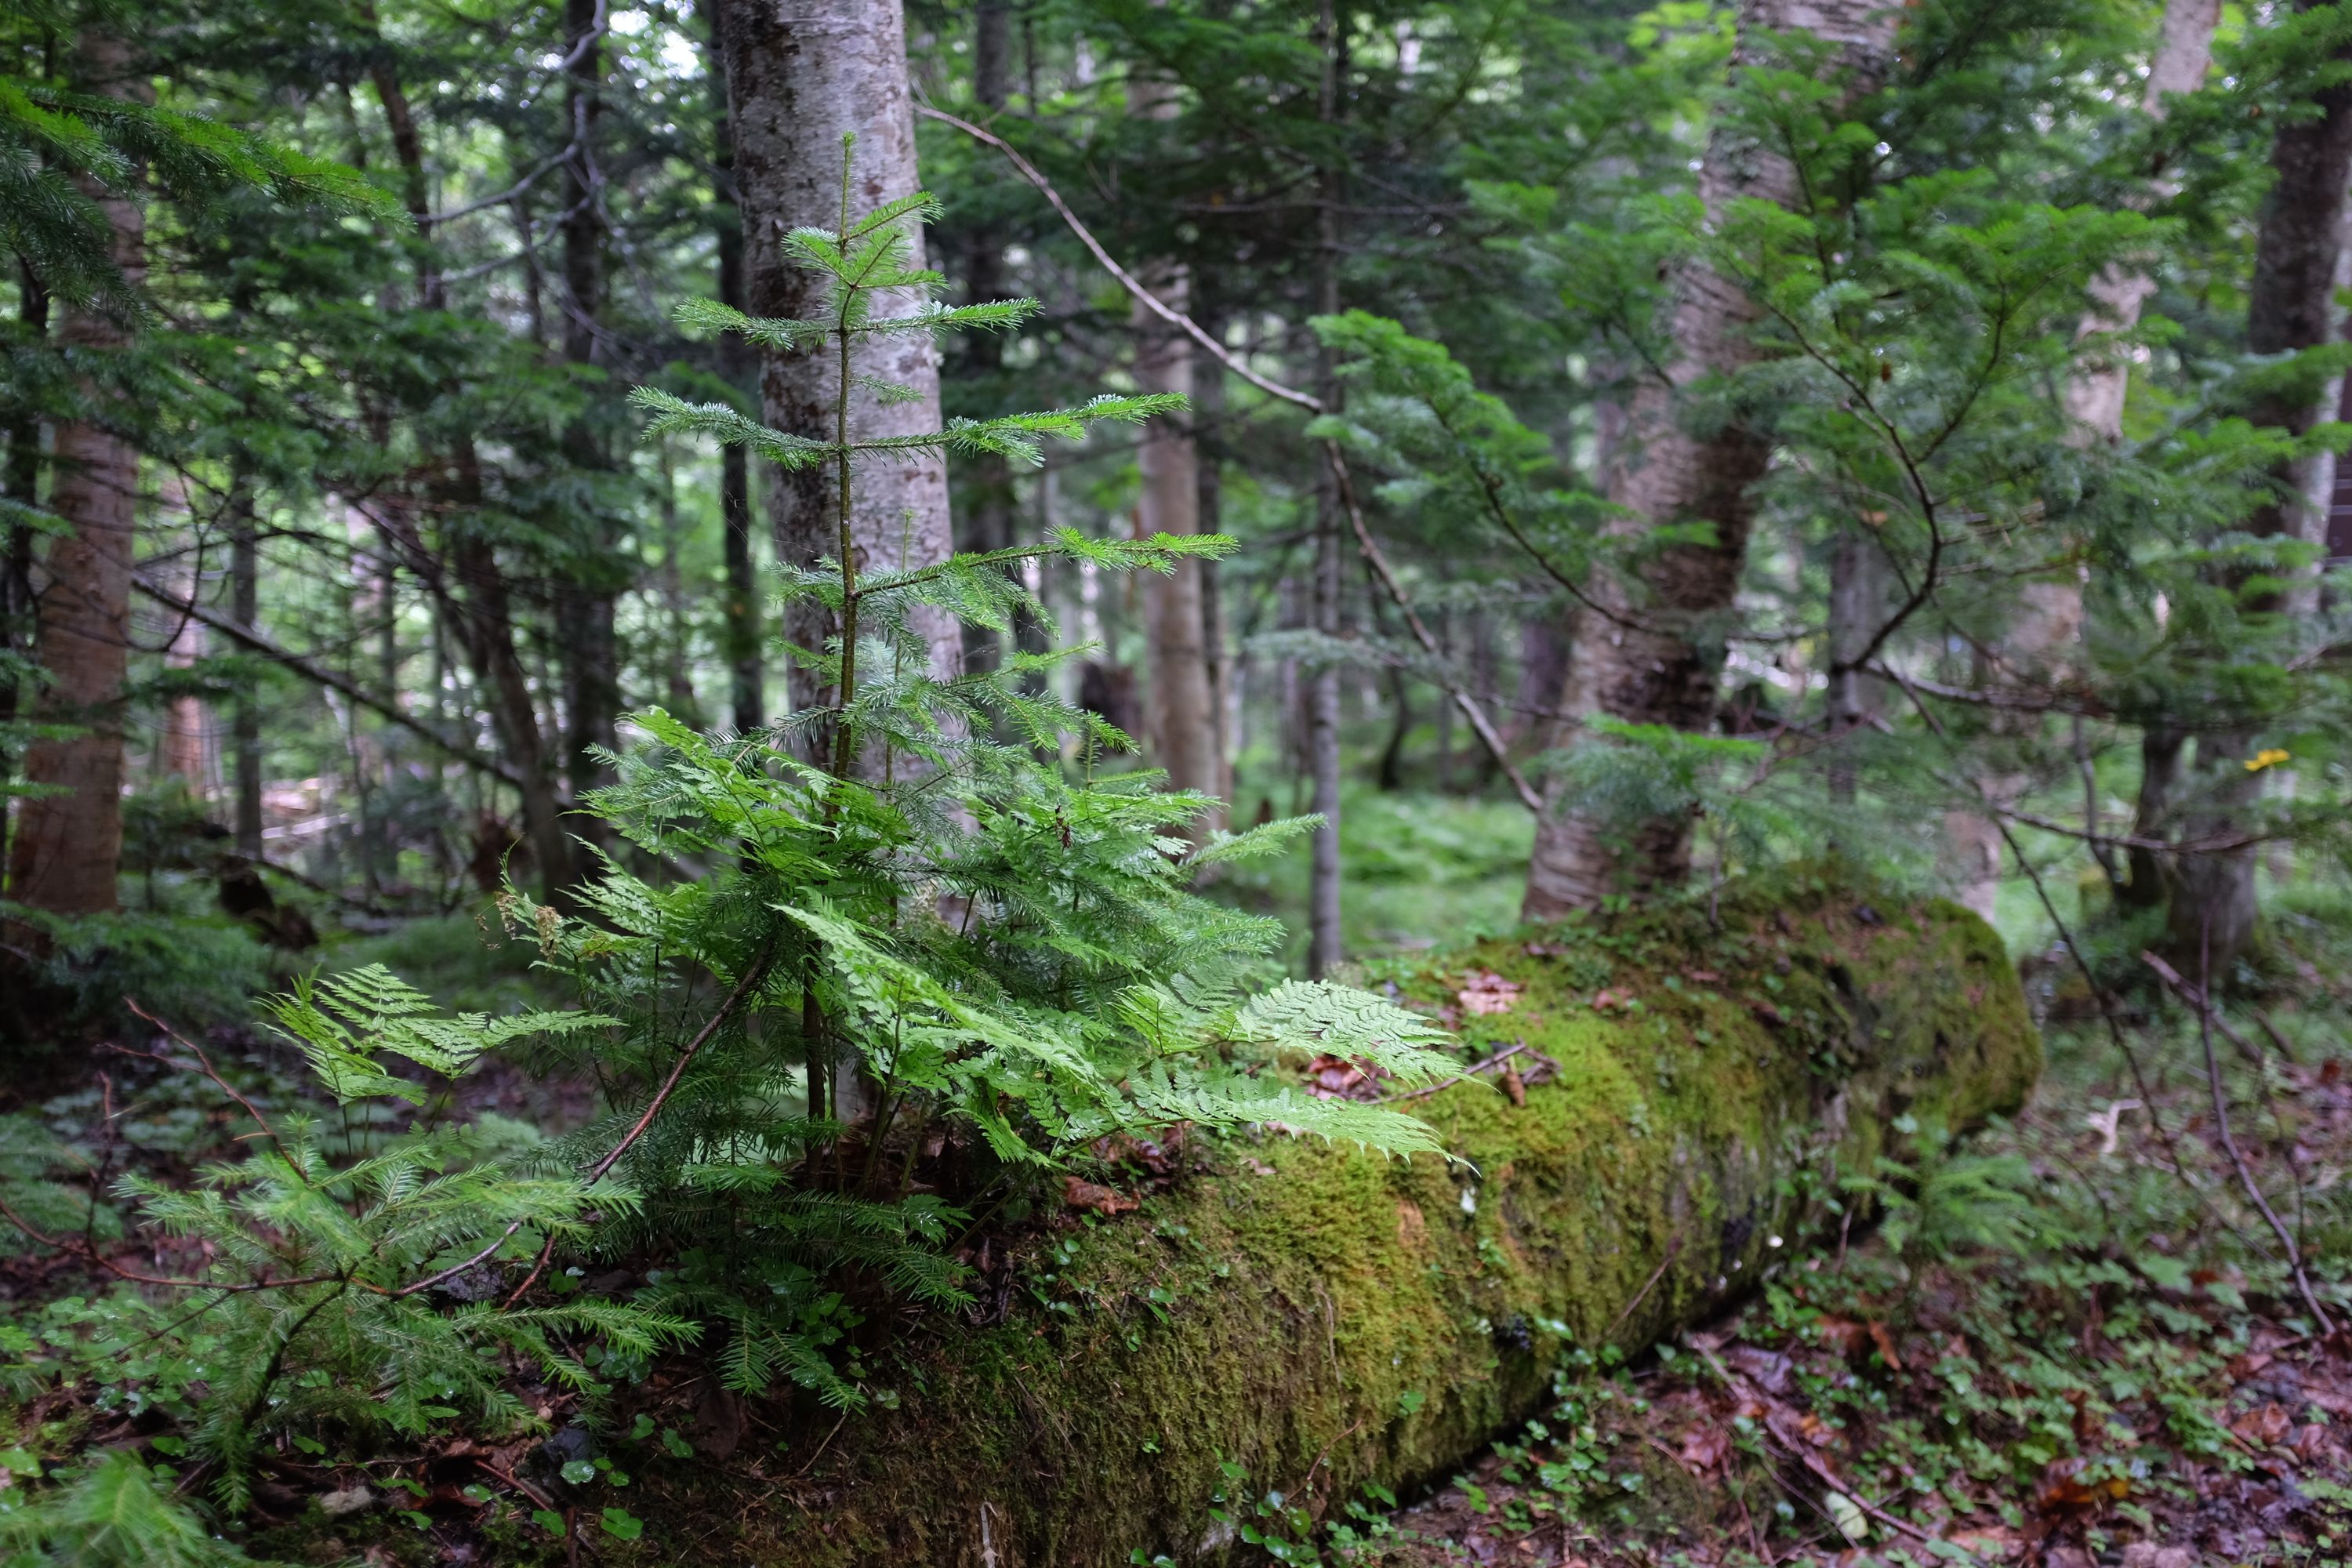 A moss-covered, fallen trunk in a forest.